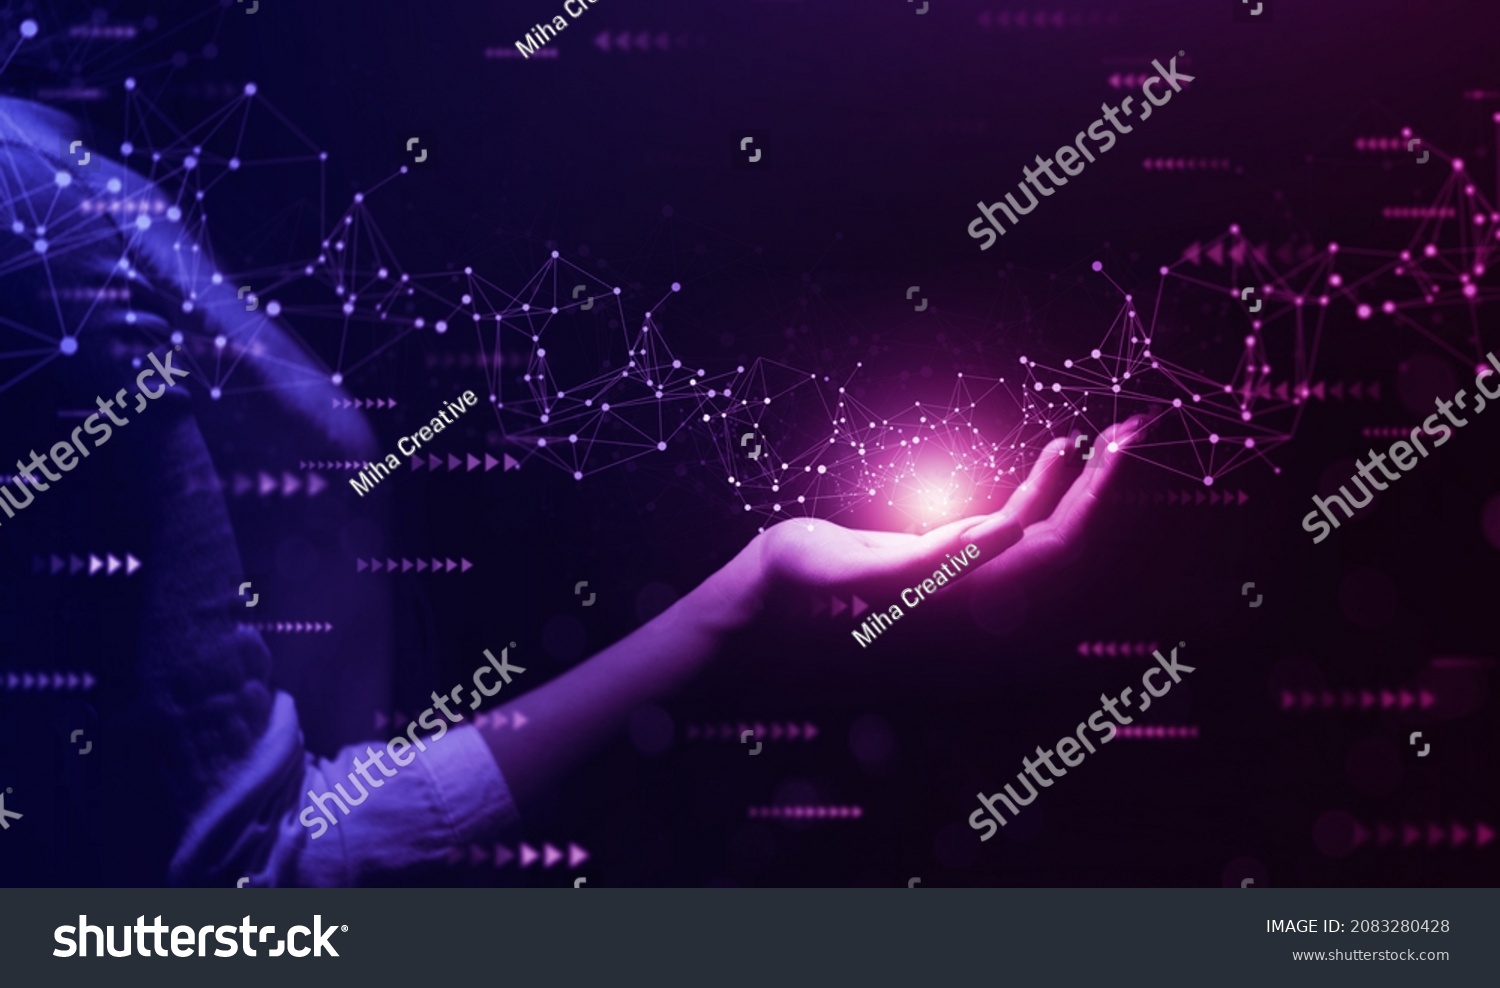 Metaverse Virtual Technology.Woman hand holding global network connection. Internet communication, Wireless connection technology. Futuristic technology with polygonal shapes. #2083280428